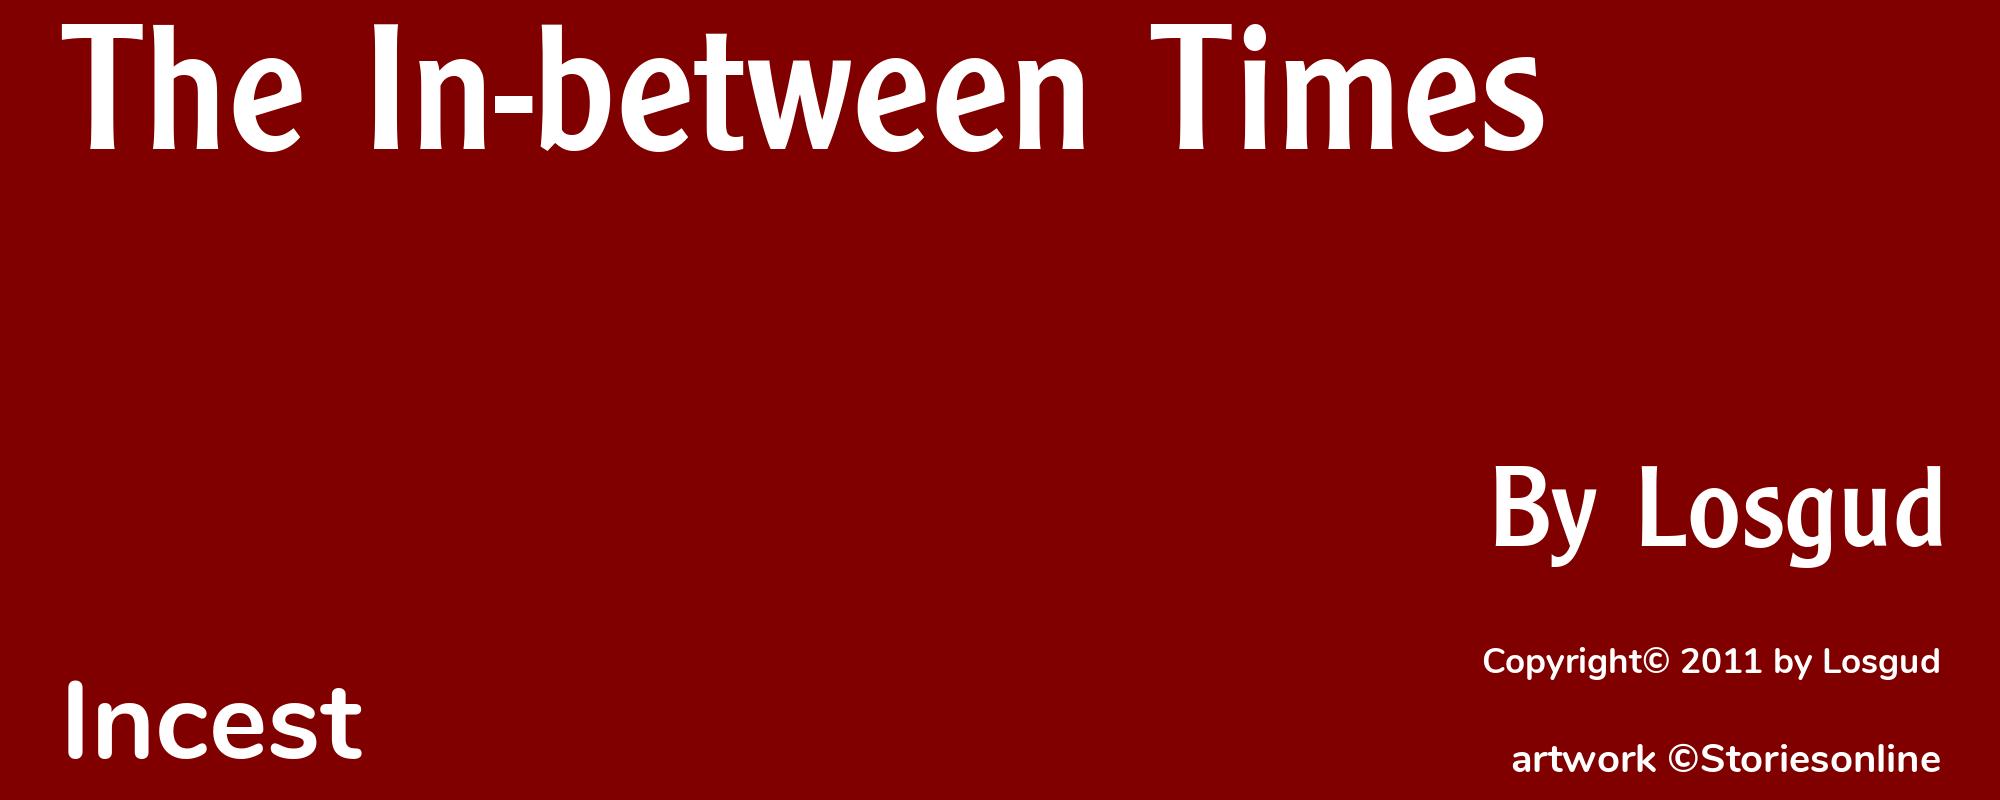 The In-between Times - Cover